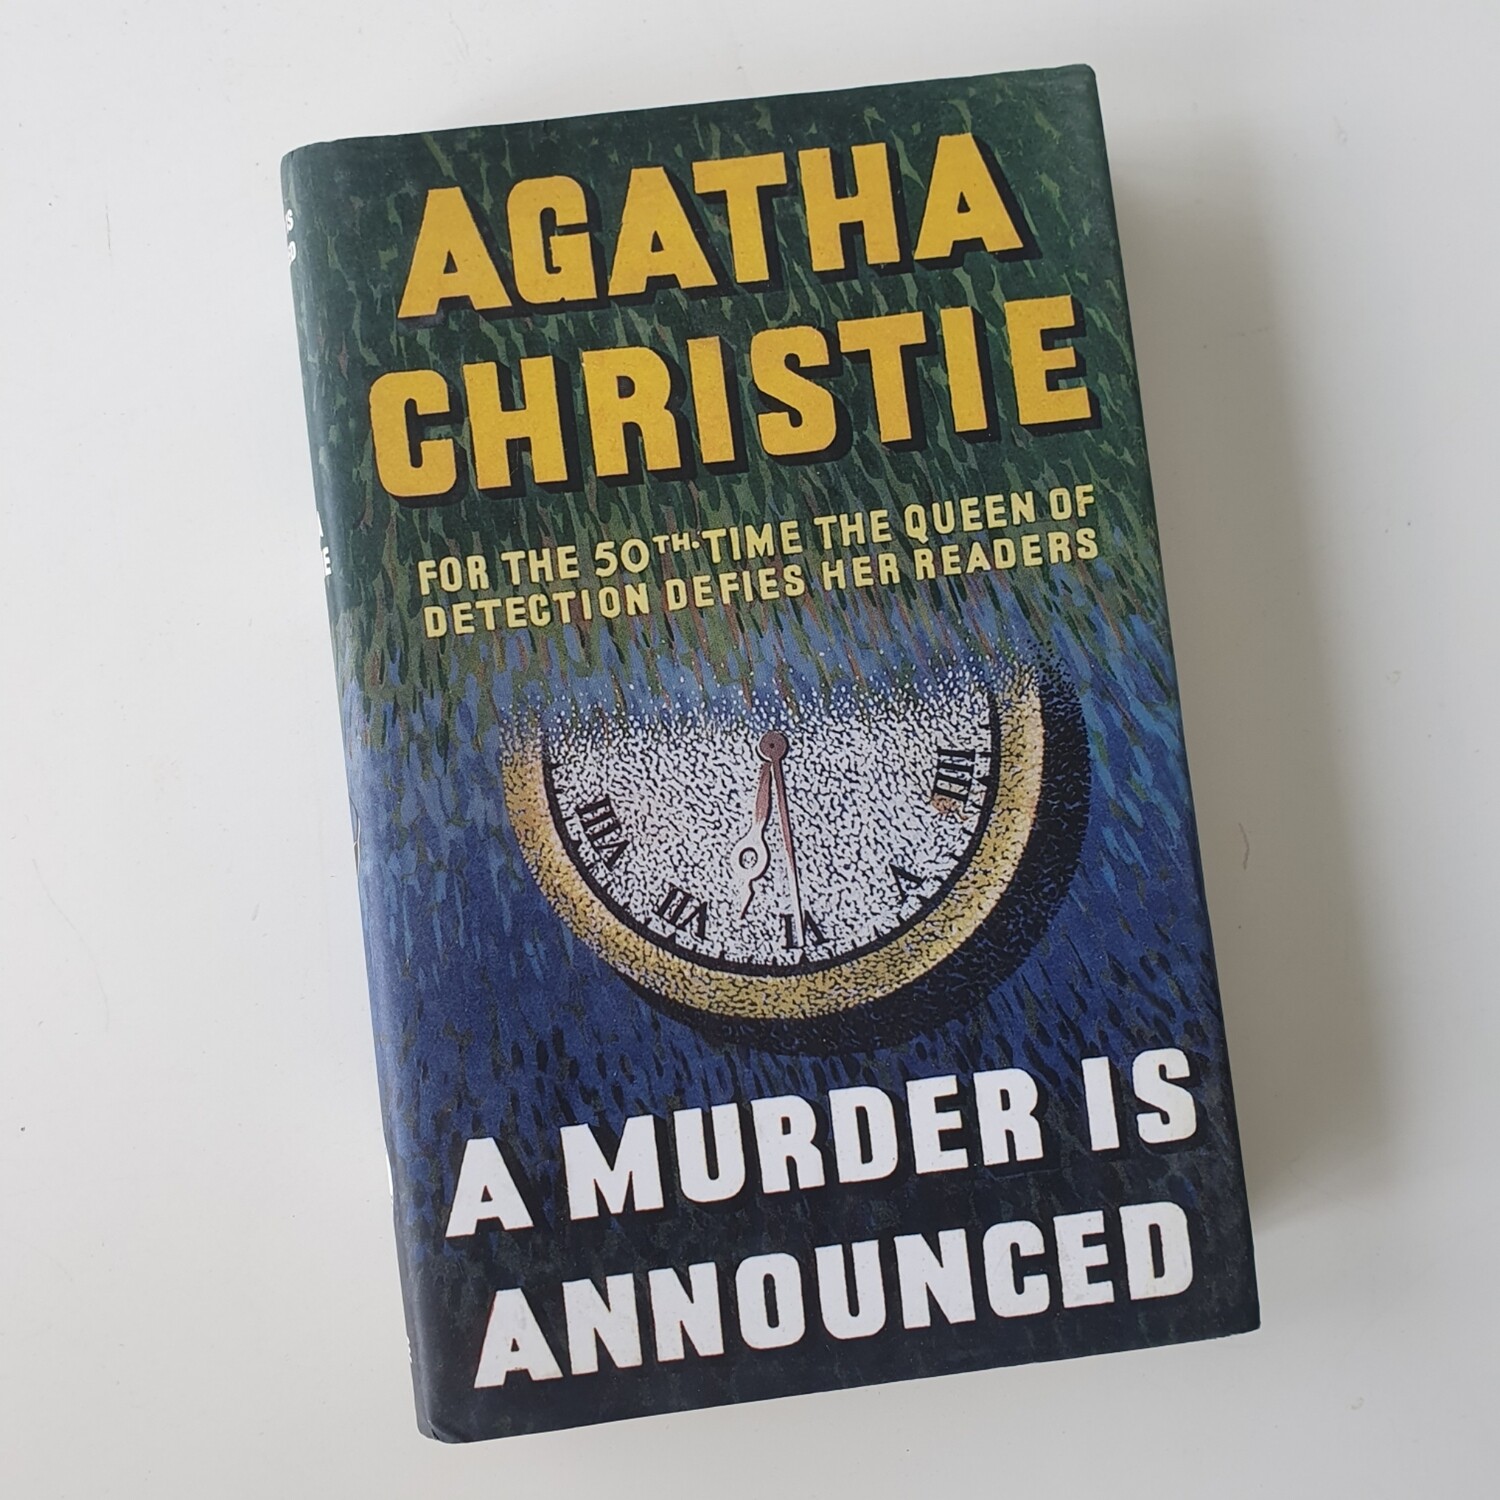 Agatha Christie - A Murder is announced Notebook - made from a dust jacket